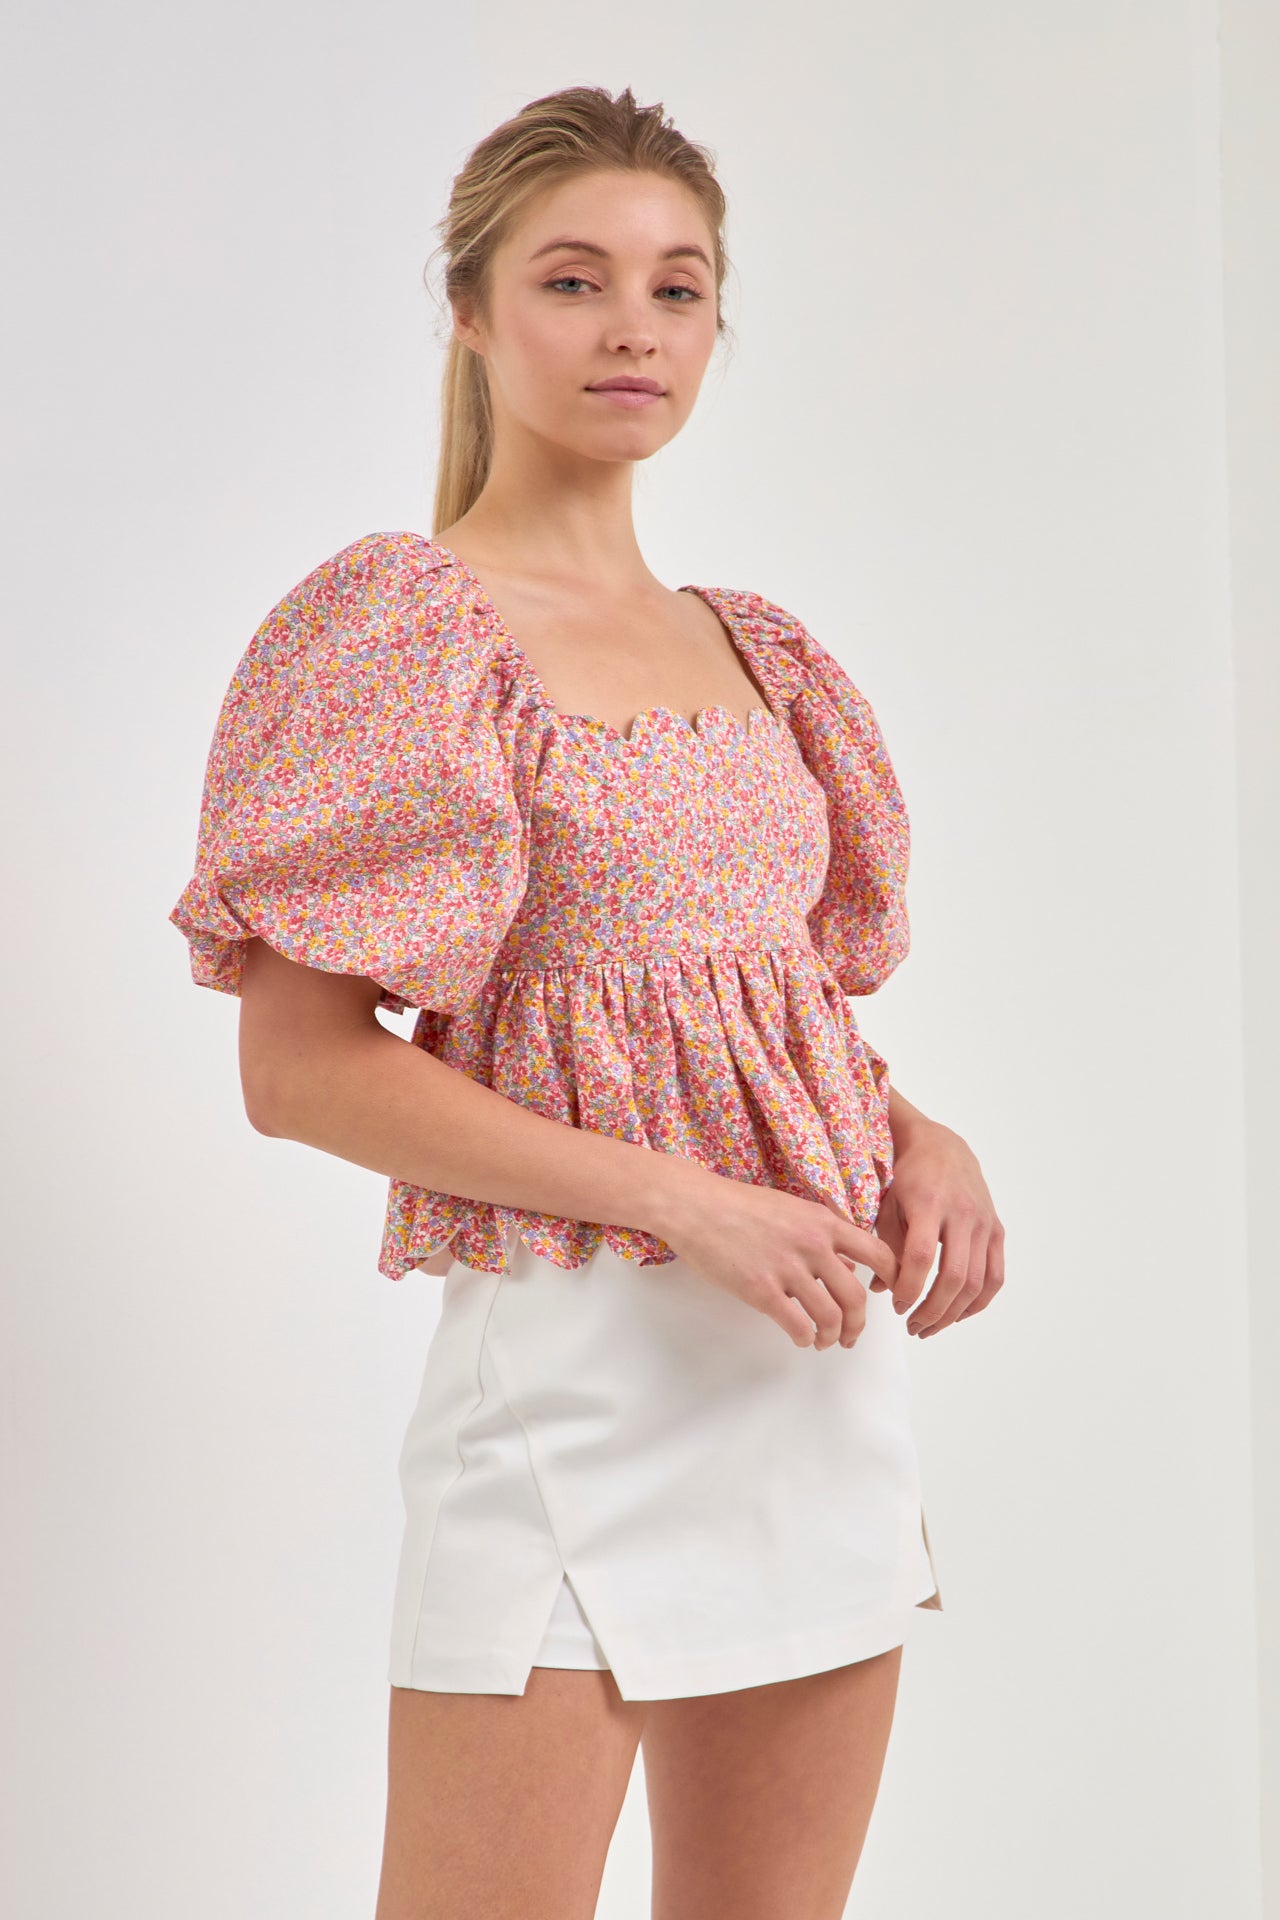 FREE THE ROSES - Scalloped Detail Top - TOPS available at Objectrare